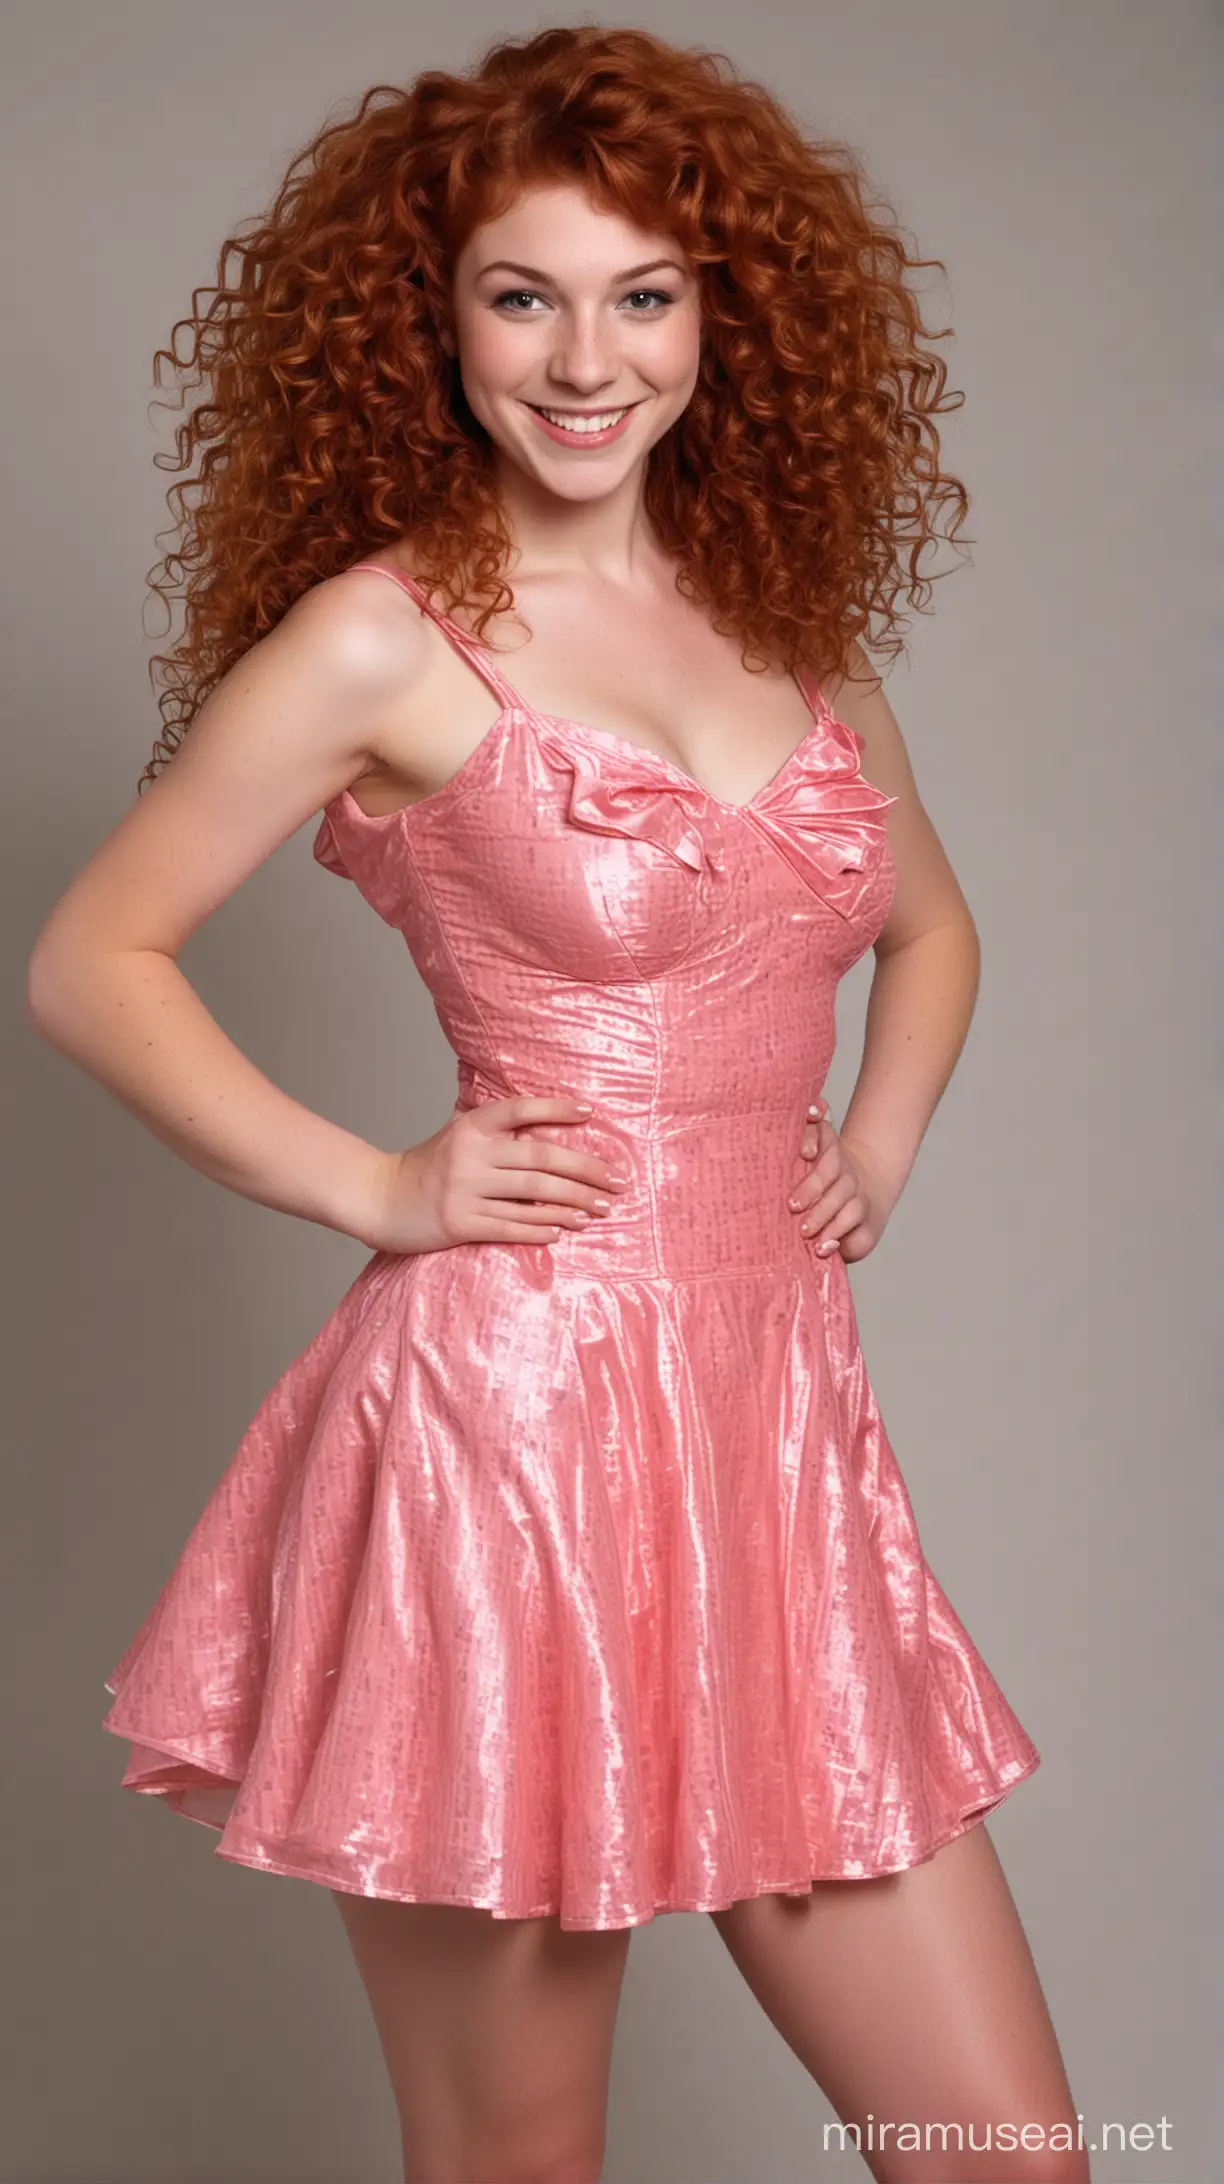 Sexy, 170lbs, teen, High school trans girl , party girl, circa 1980's, huge volumized blowout salon styled Irish red curly hair, wearing short sexy teen party attire to show off her curves, showing feminine deportment and a vapid demure smile, facing the viewer, full body image